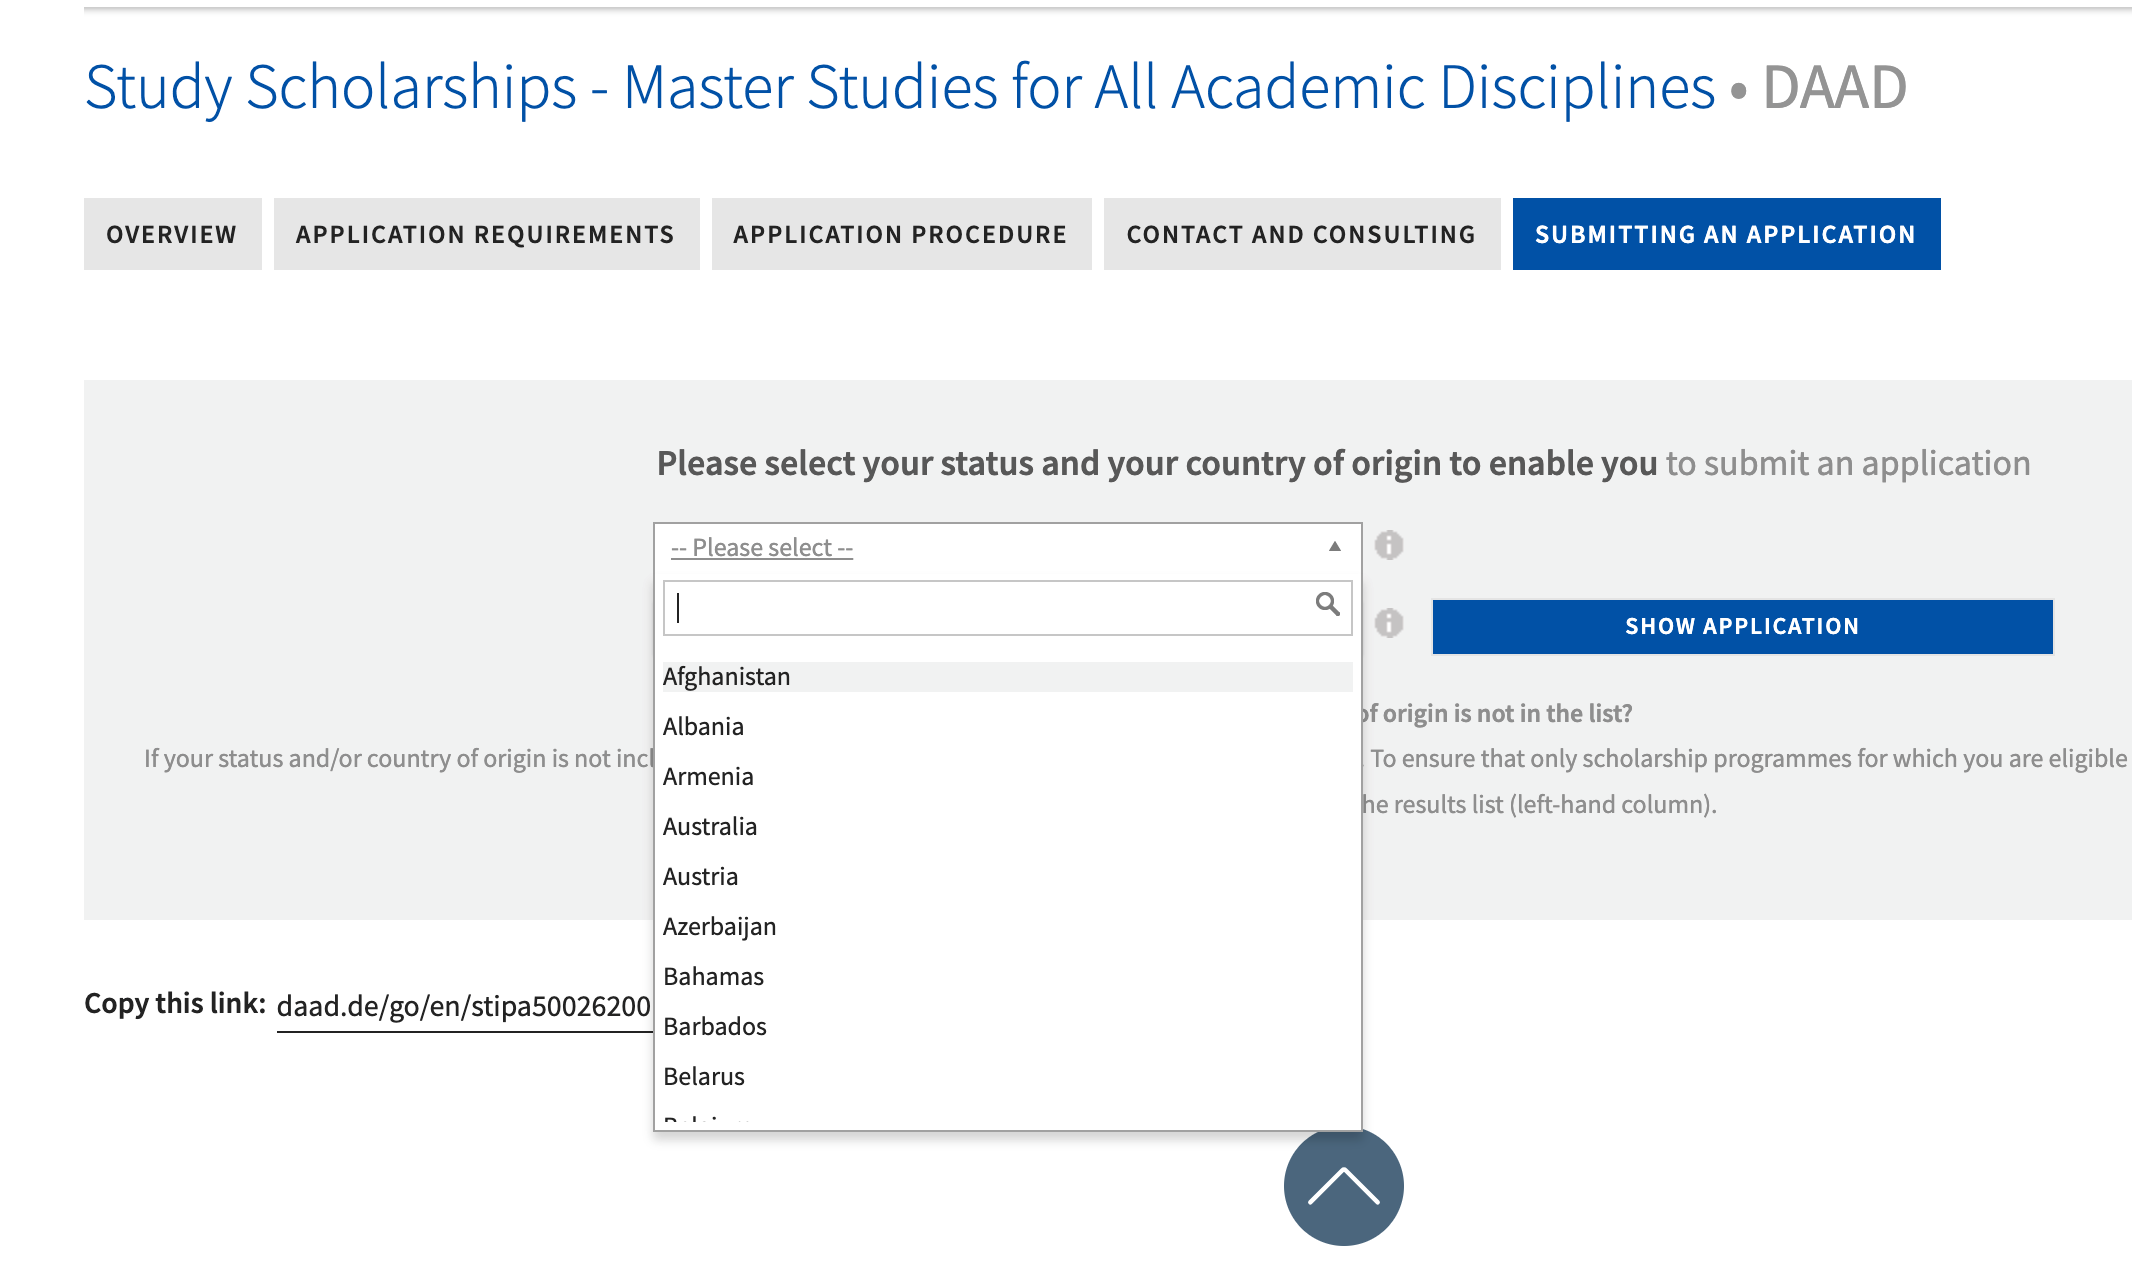 DAAD Study Scholarships for Master’s Degree Studies 2023-2024: How to Apply and Qualify